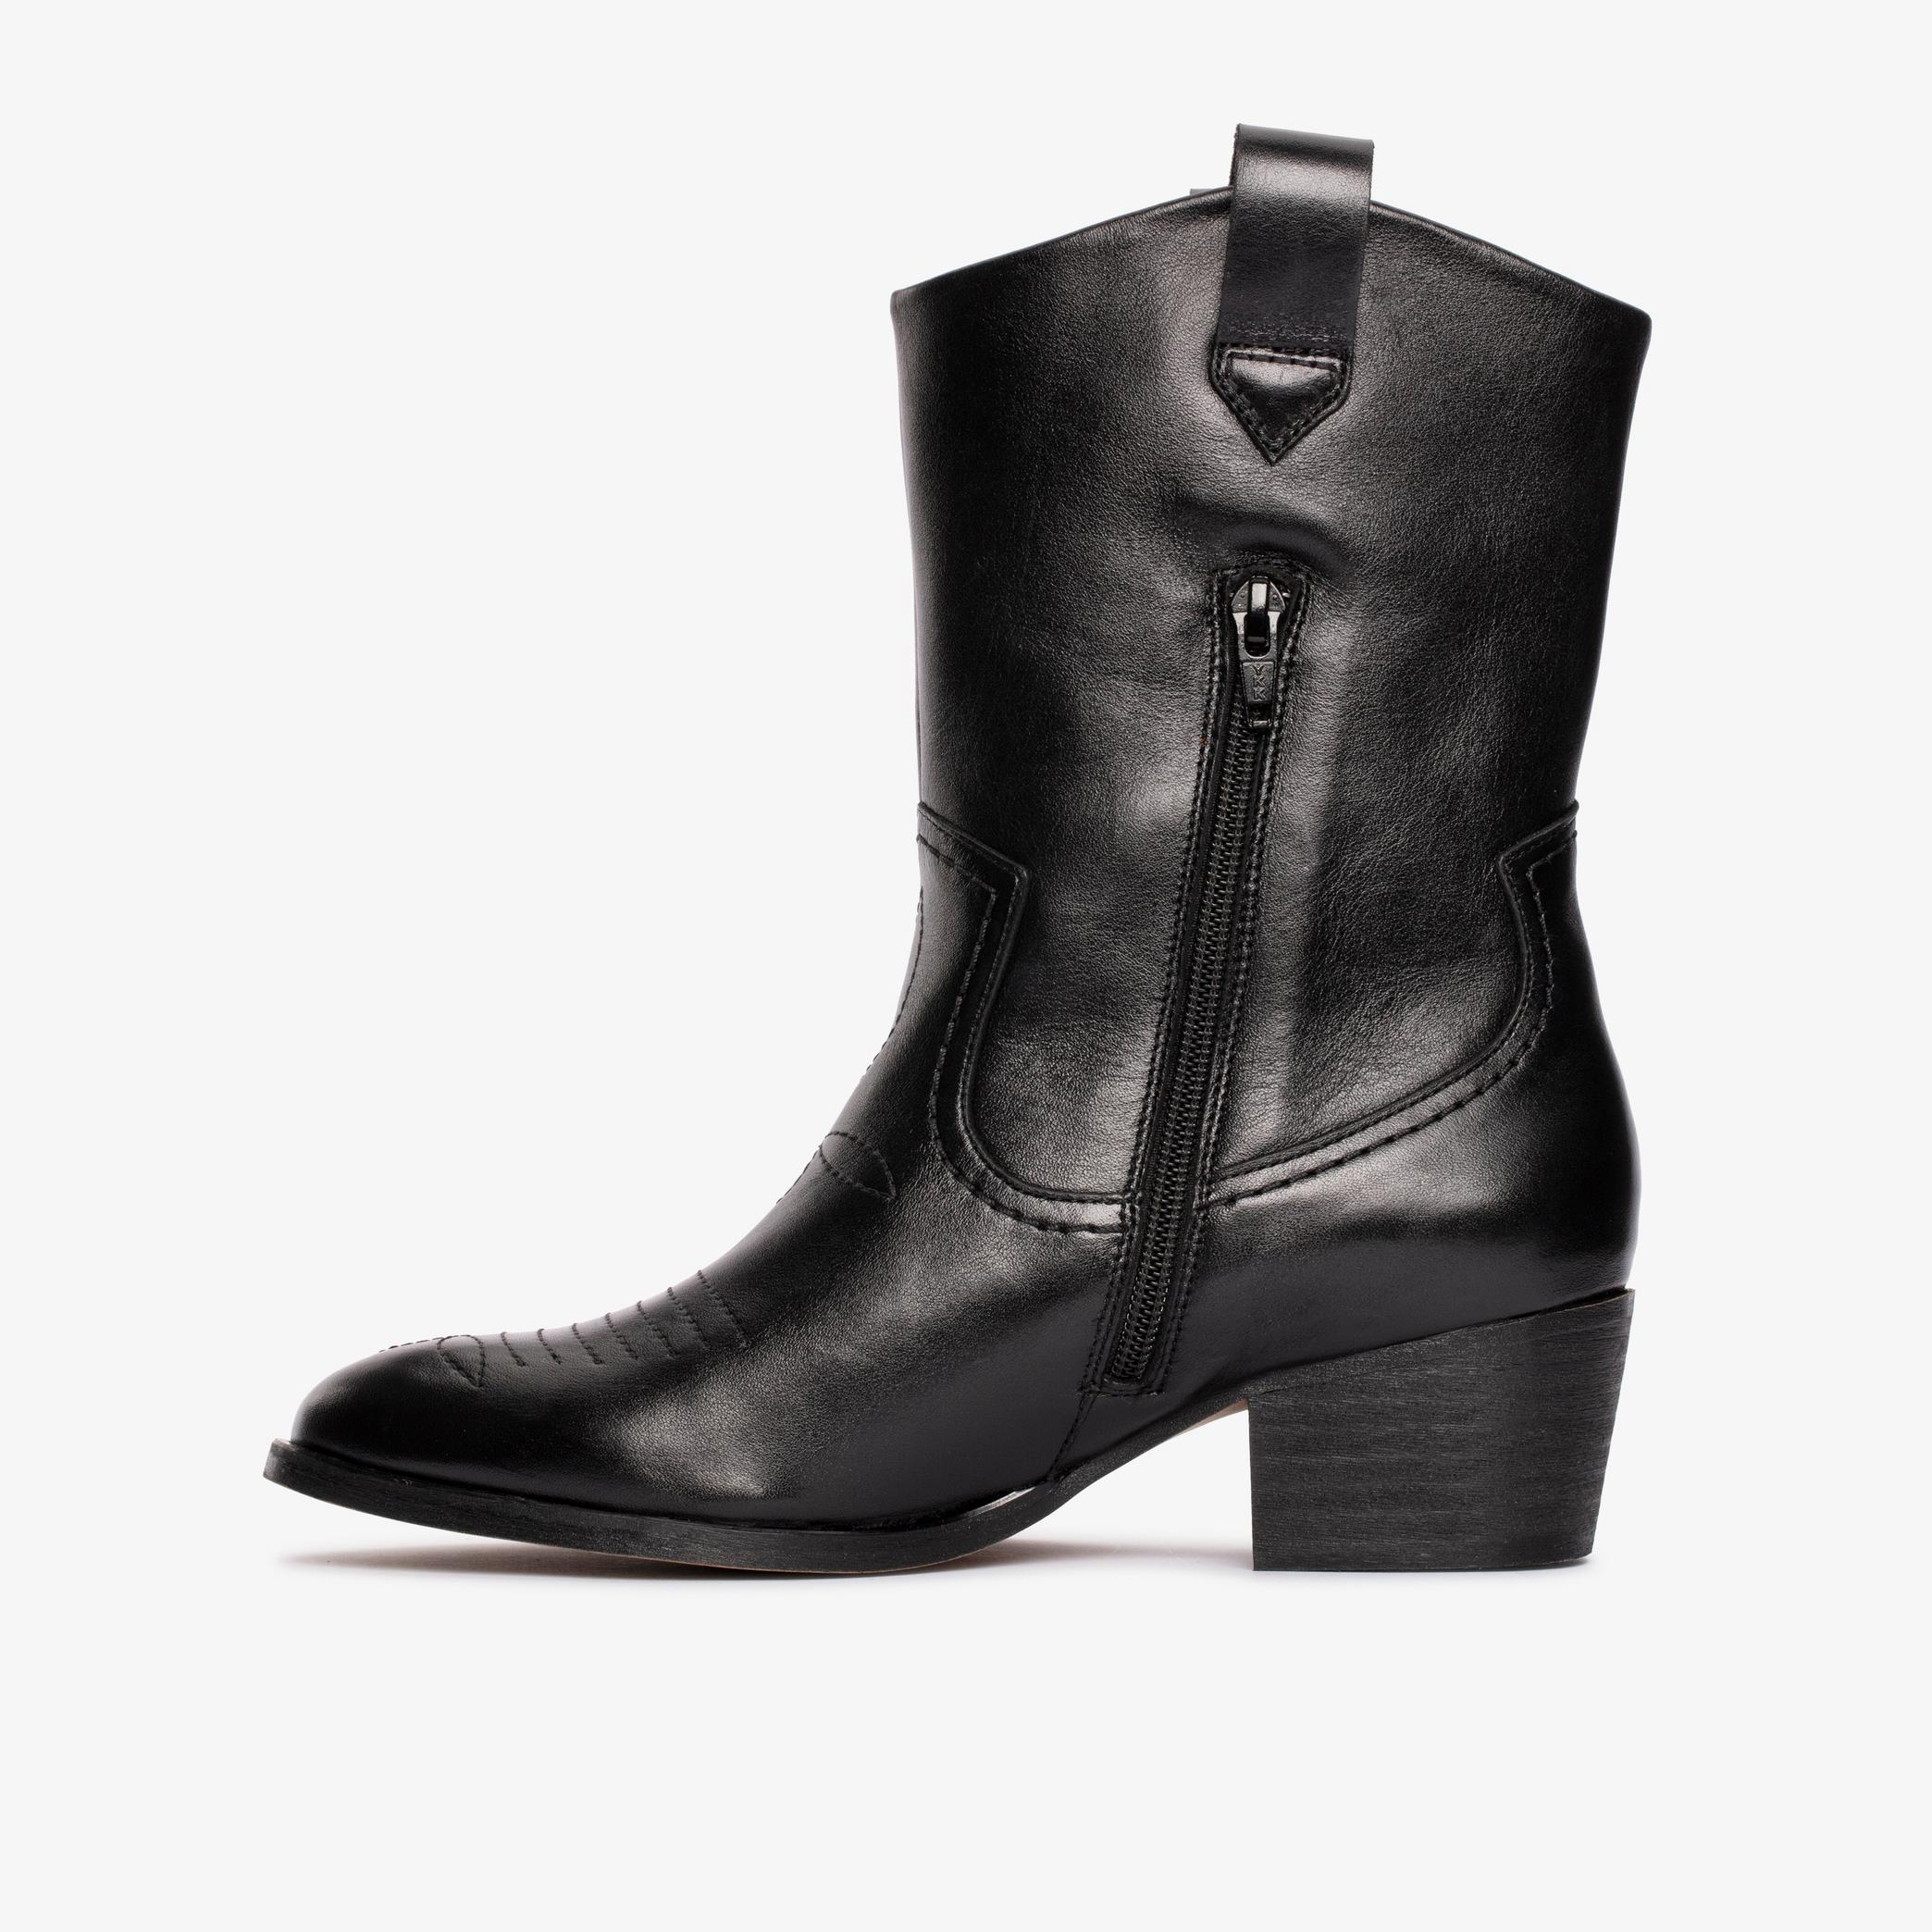 Octavia Up Black Leather Mid Calf Boots, view 2 of 6